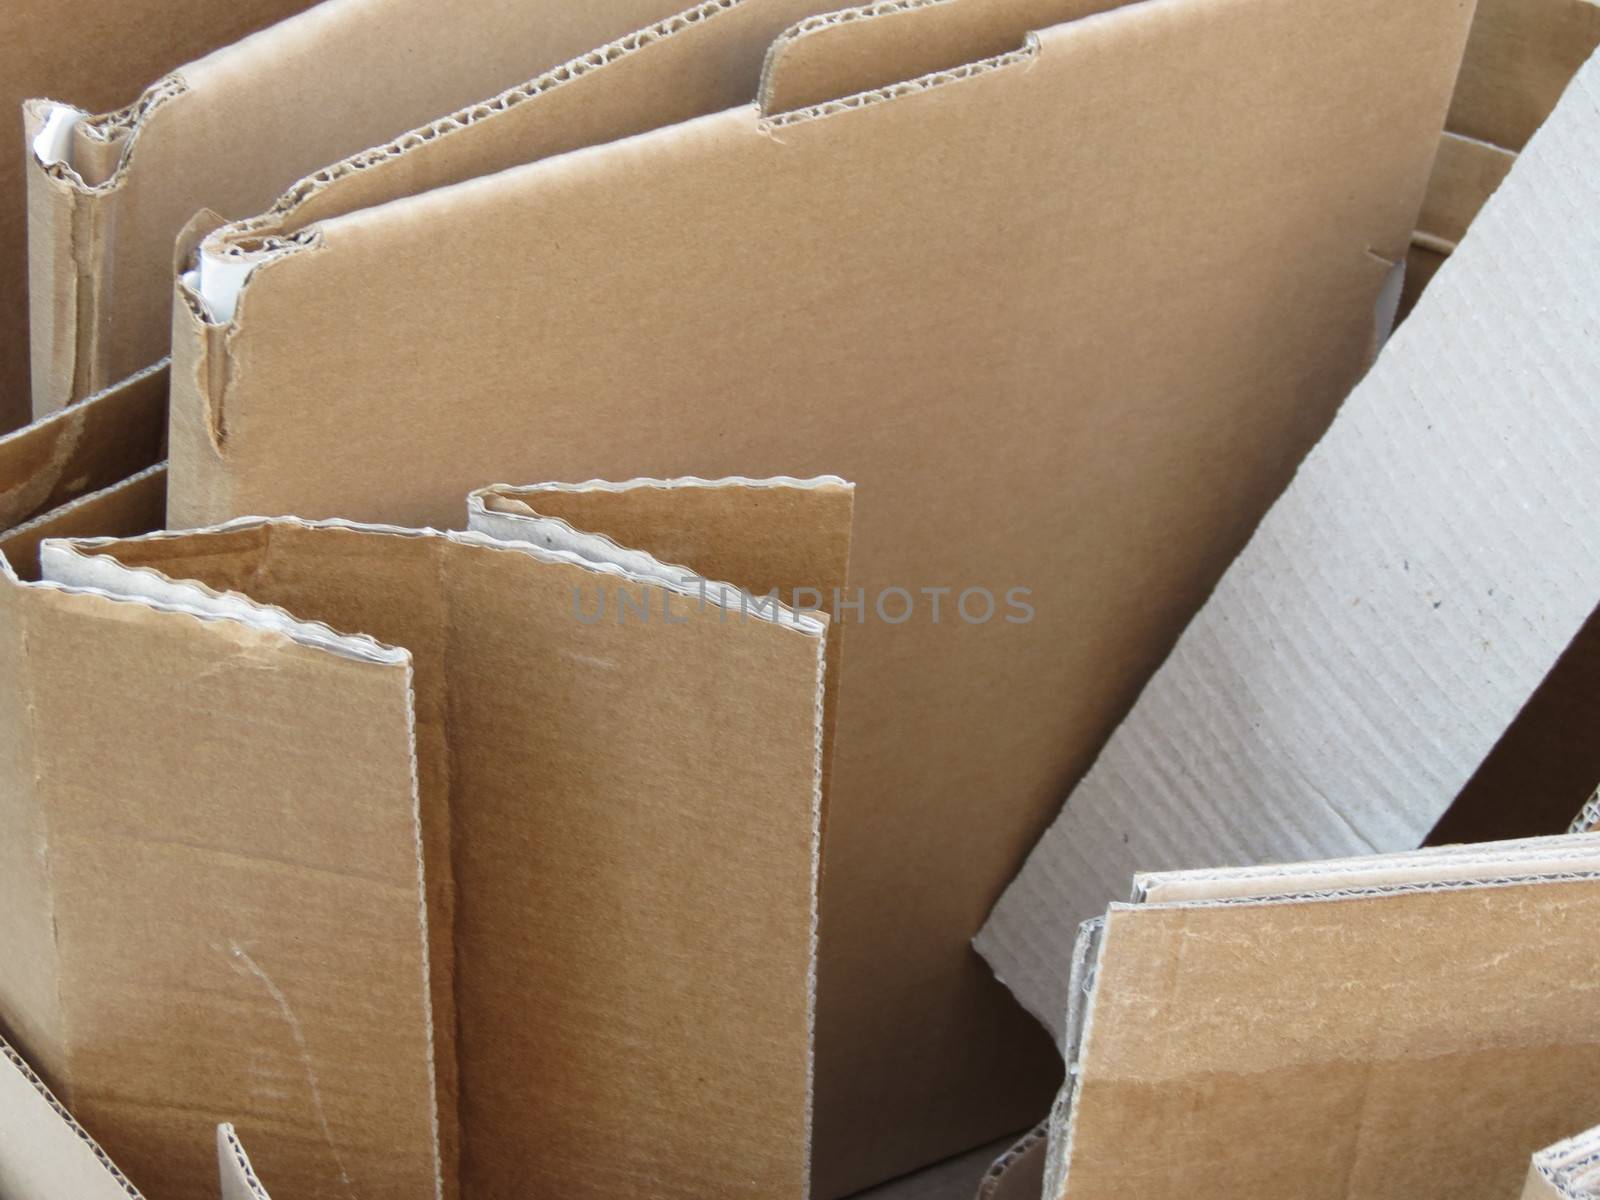 Corrugated cardboard by paolo77